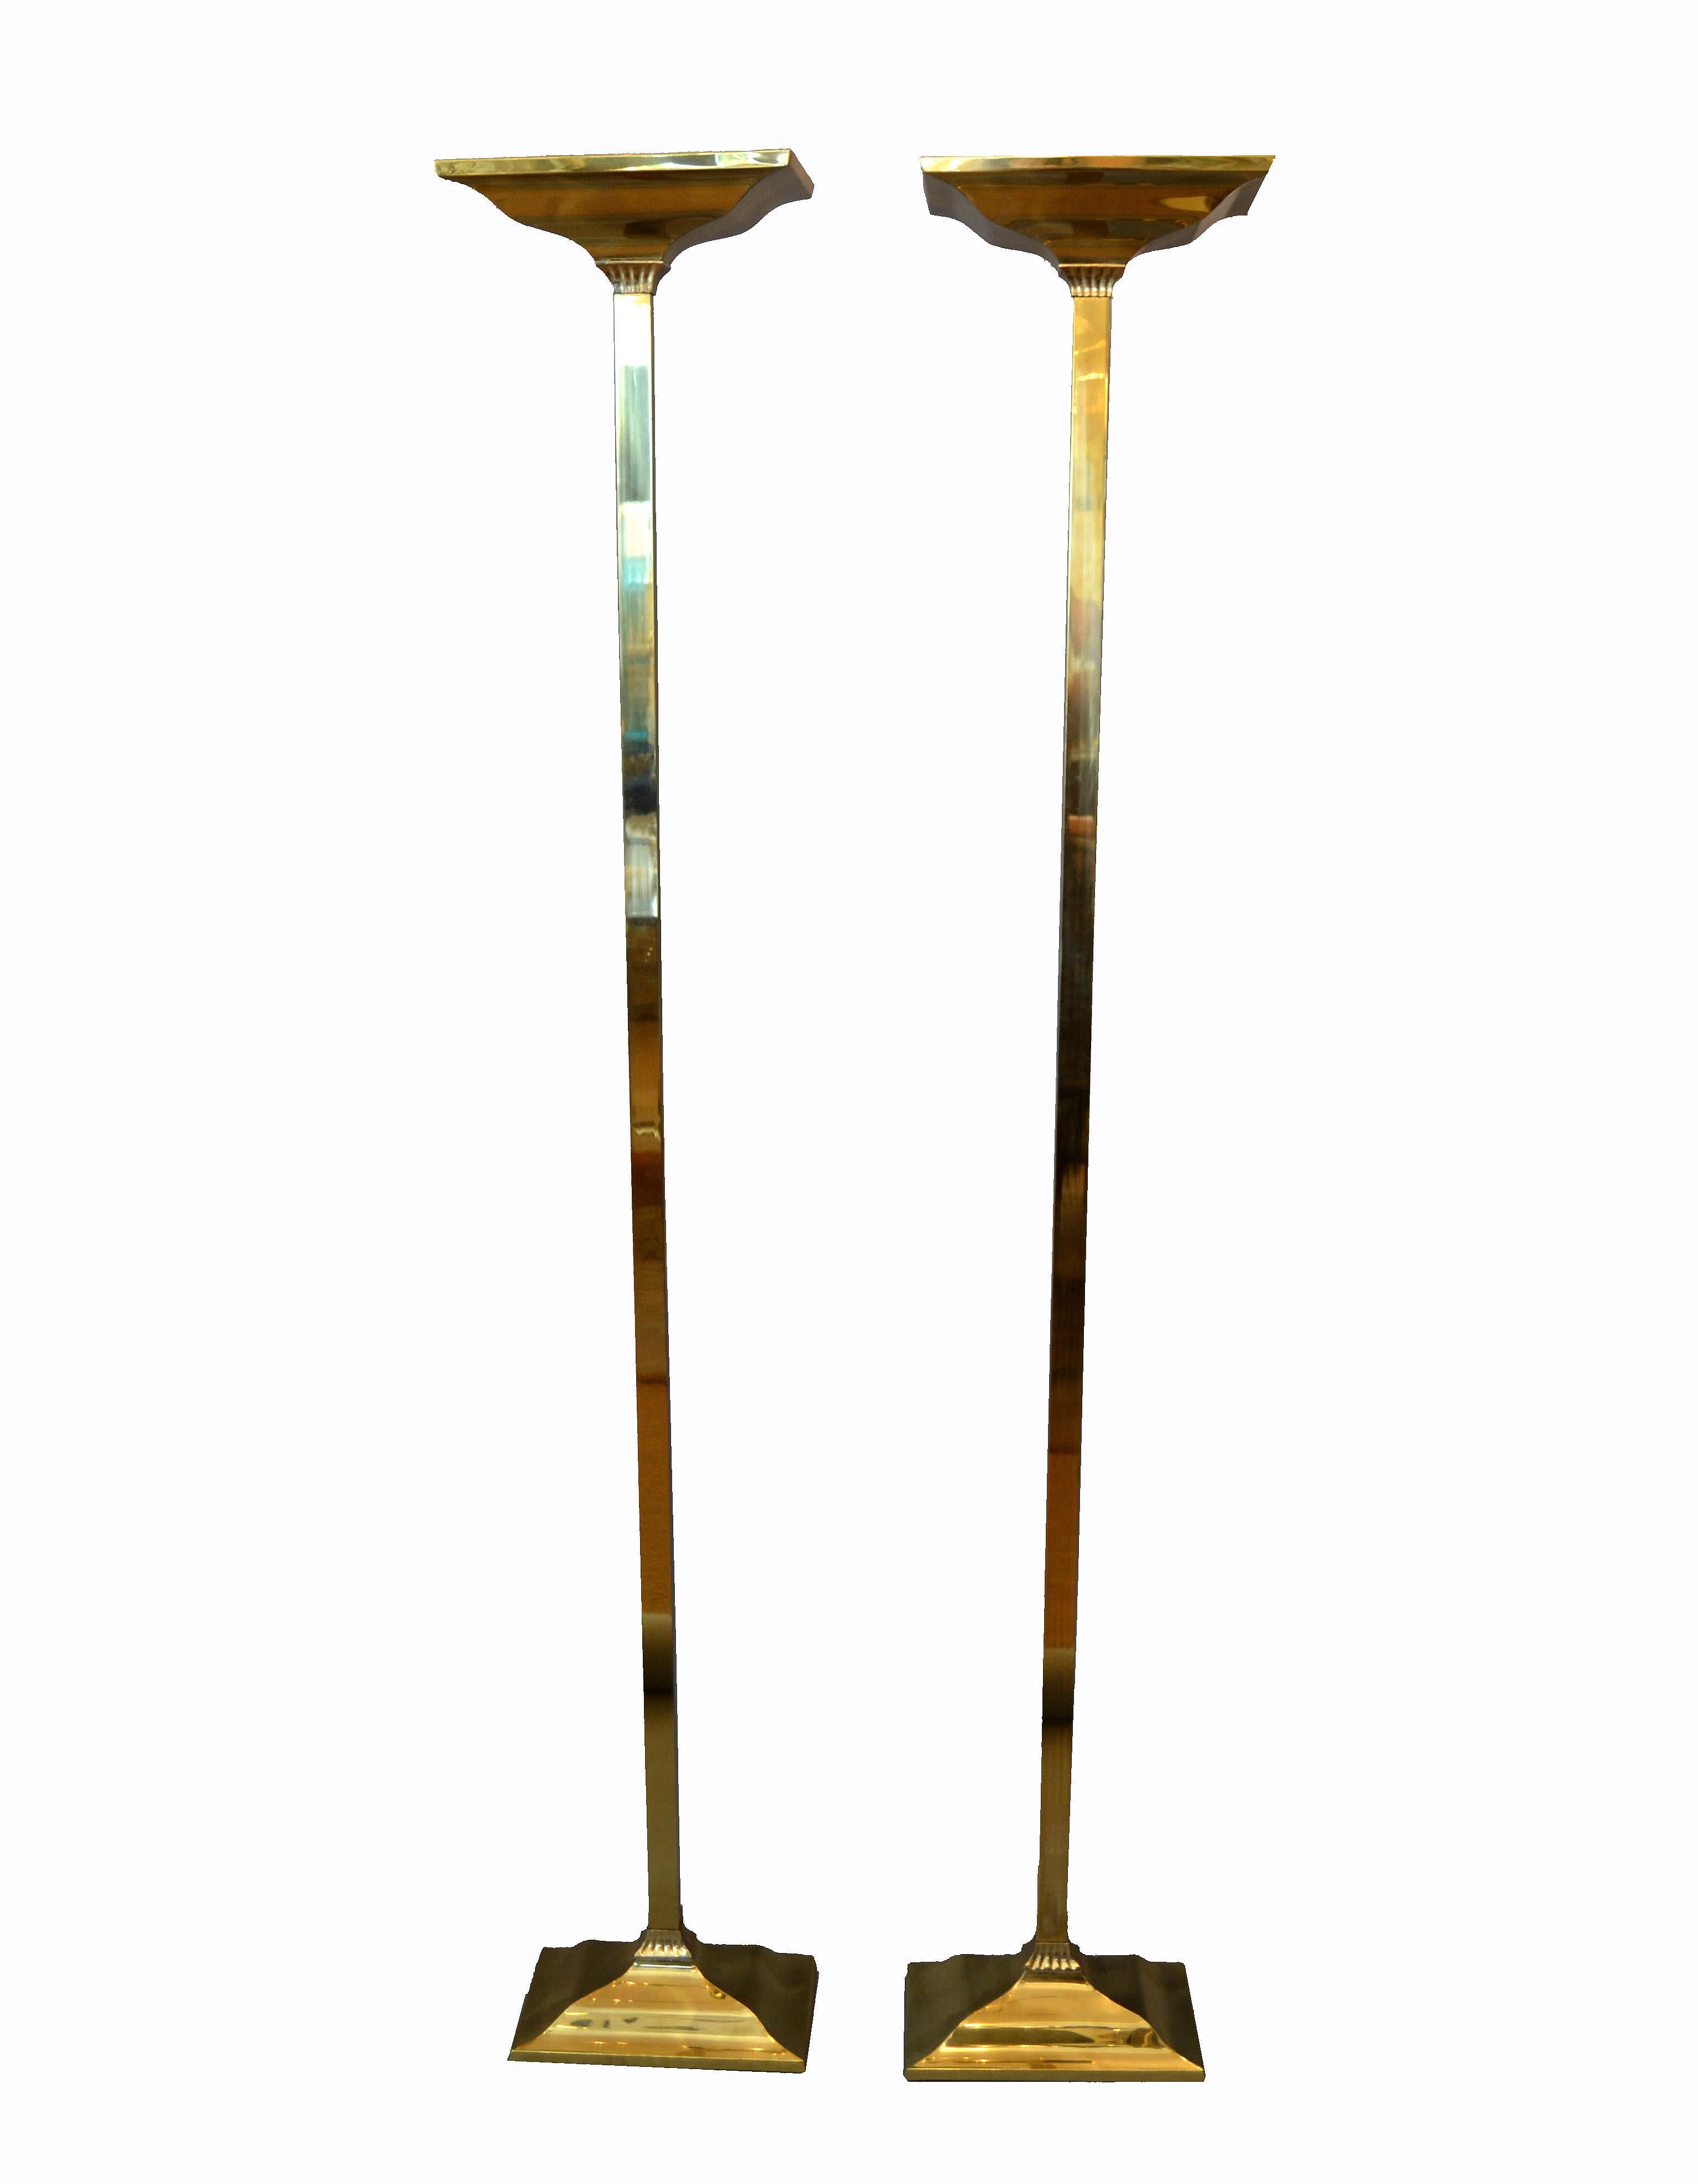 A pair of Hollywood Regency brass torchiere floor lamps.
Both are in perfect working condition and each comes with an Halogen Light.
The brass has been recently polished.